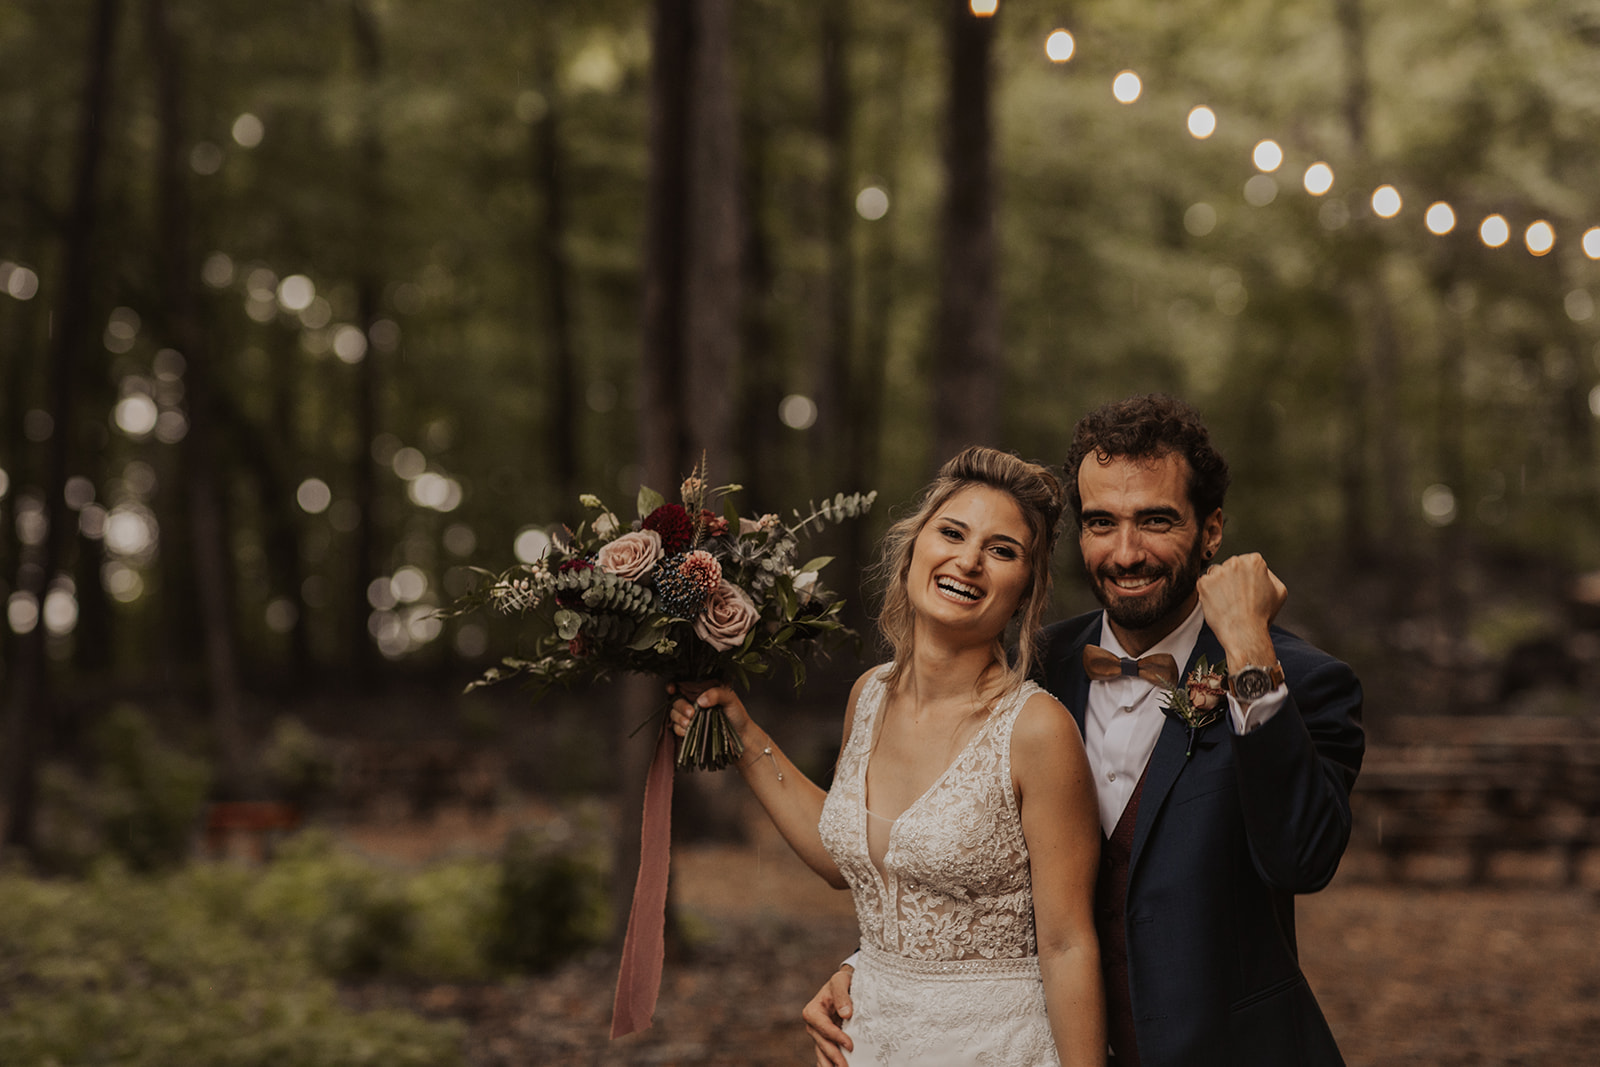 Happy bride and groom in forest with burgundy and mauve wedding bouquet | Kerstin Hahn Photography | La Bullerie